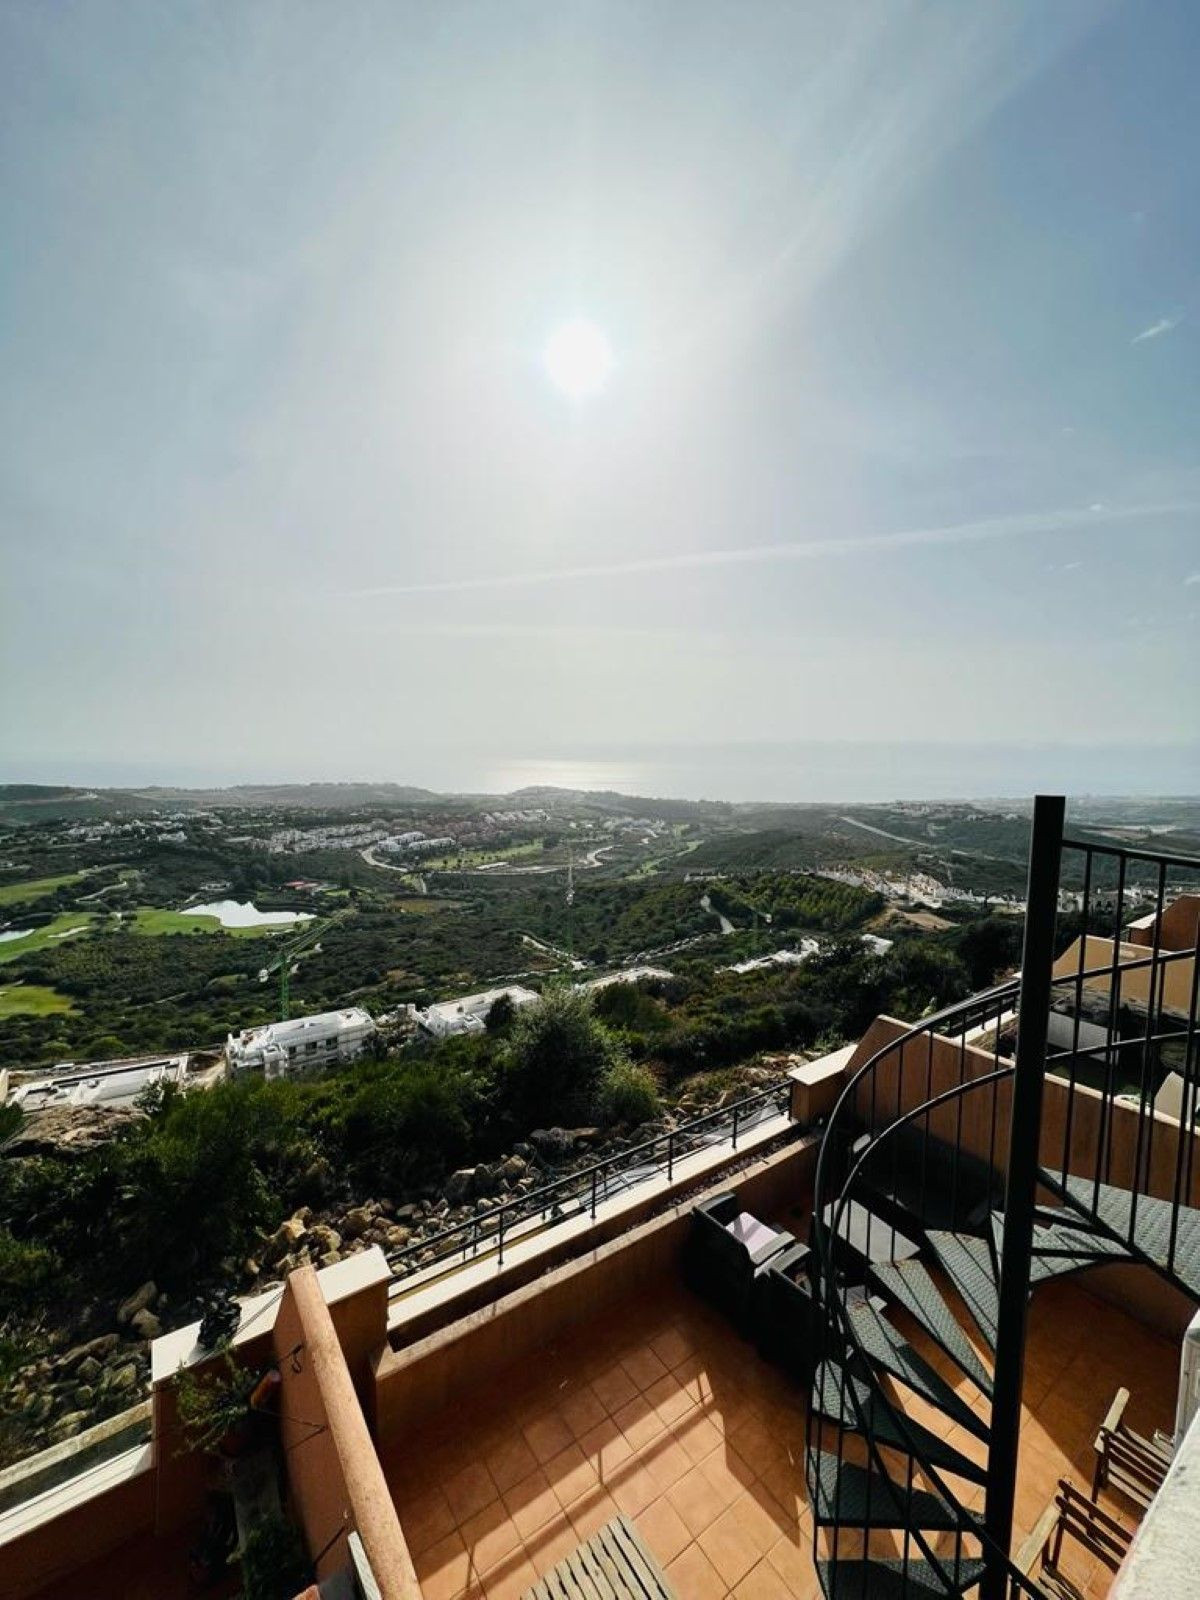 						Apartment  Penthouse
													for sale 
																			 in Doña Julia
					